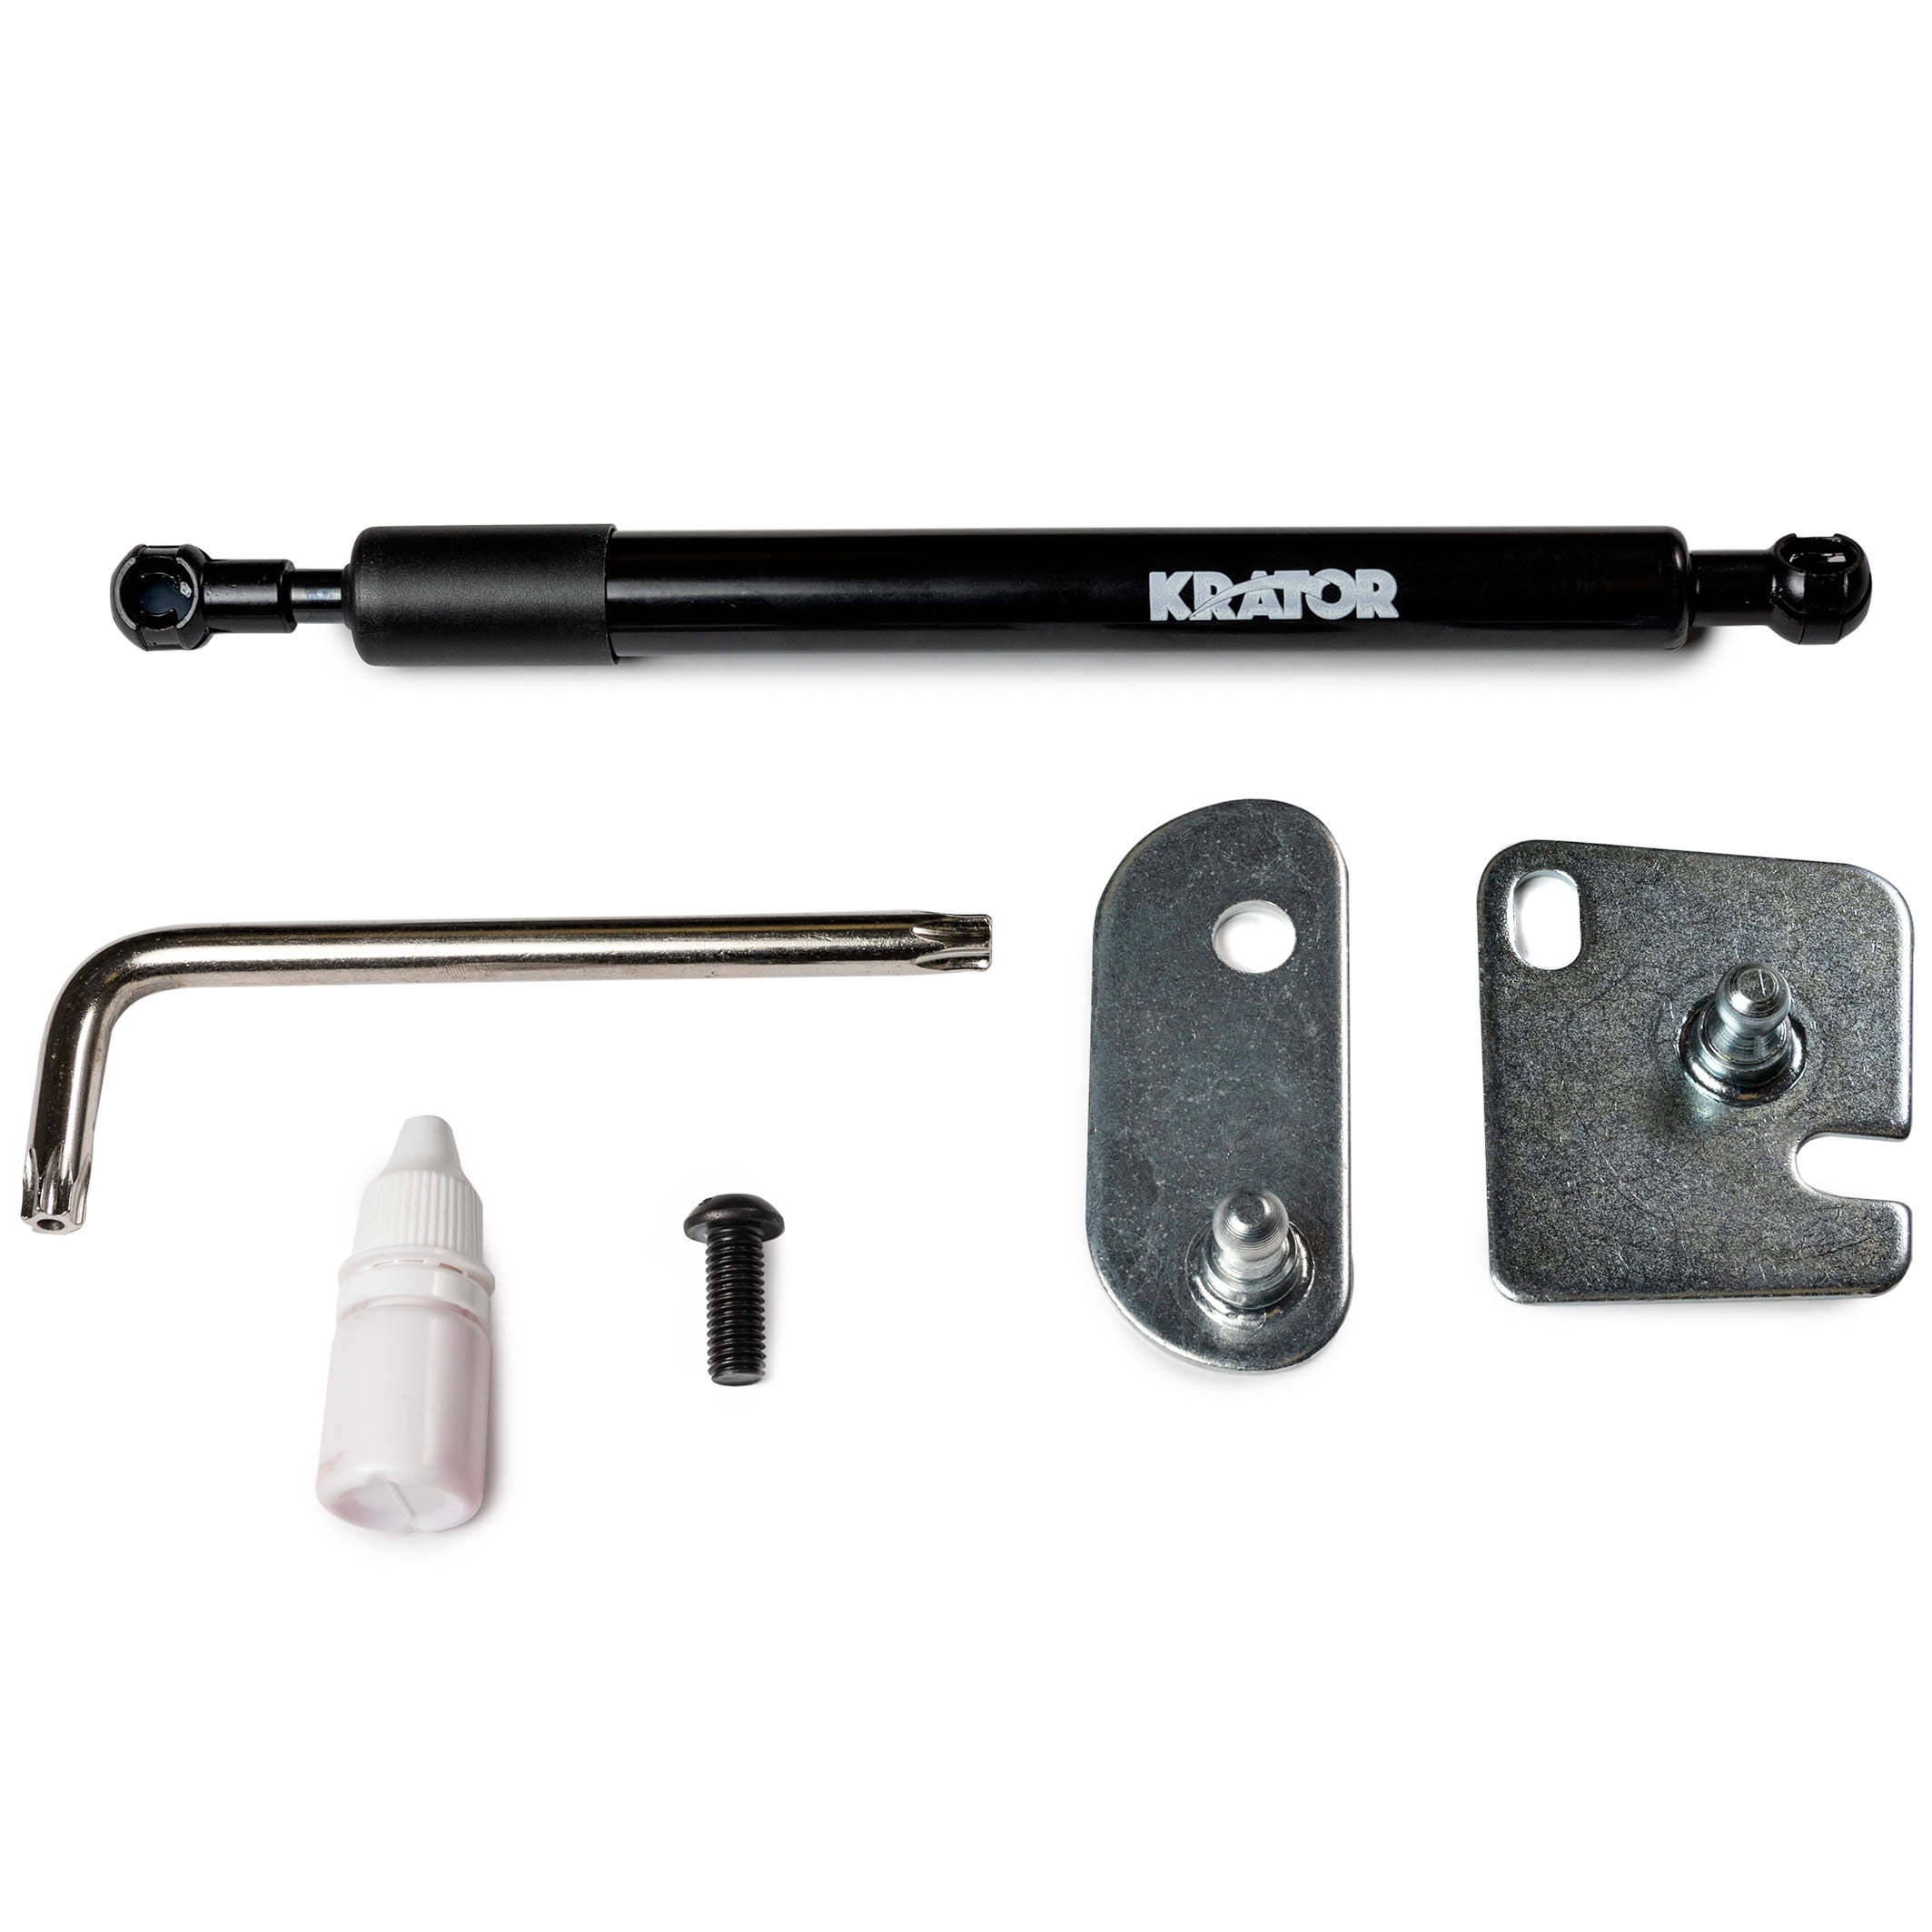 1999-2016 Krator Tailgate Assist Lift Support Pickup Truck Tailgate-Lowering System for Ford F-350 Super Duty